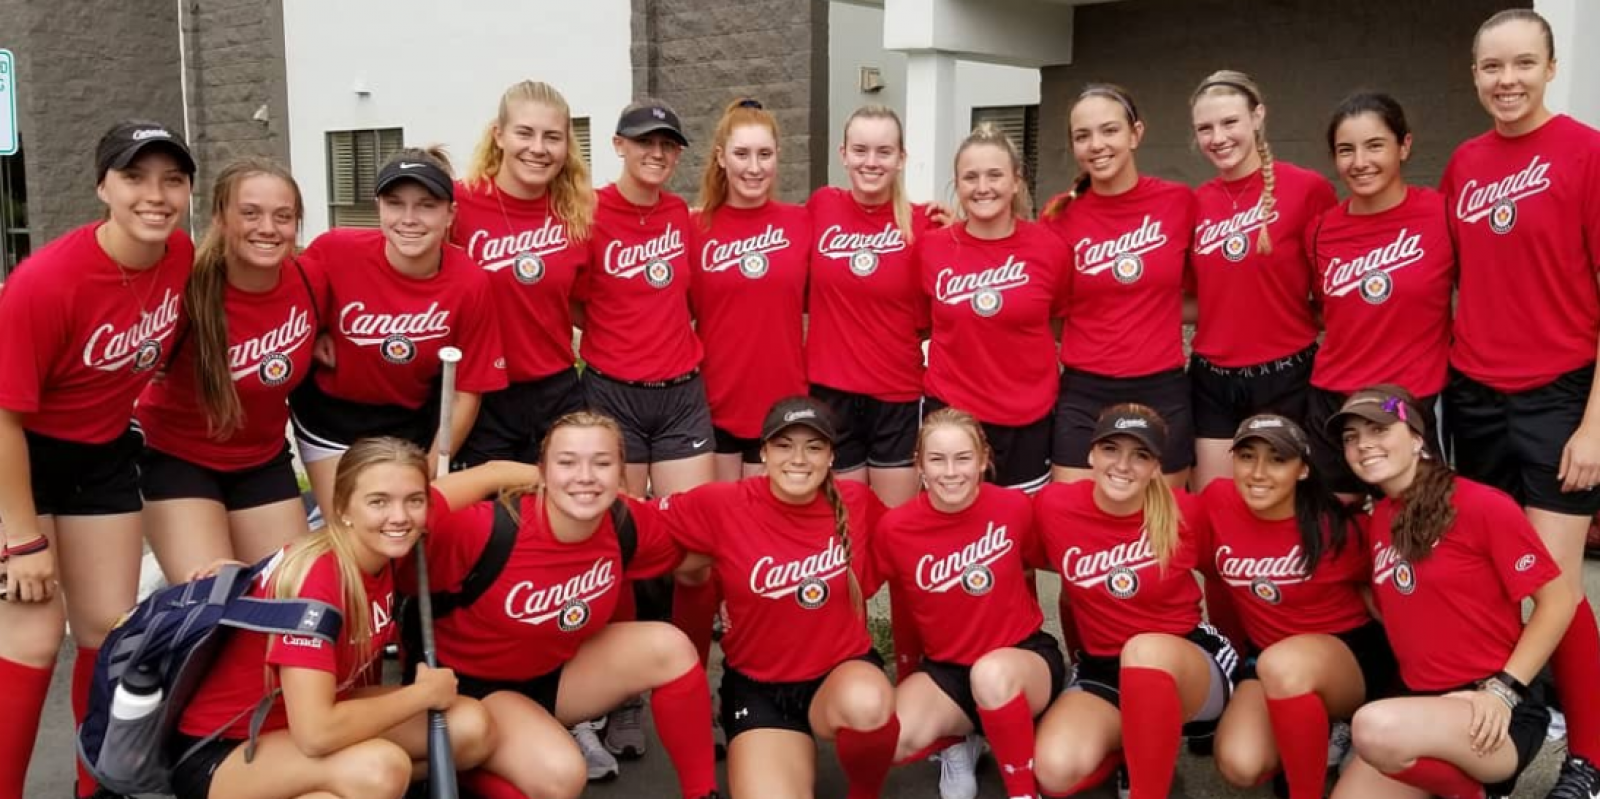 Team Canada Set to Compete at 2019 WBSC U19 Women’s Softball World Cup